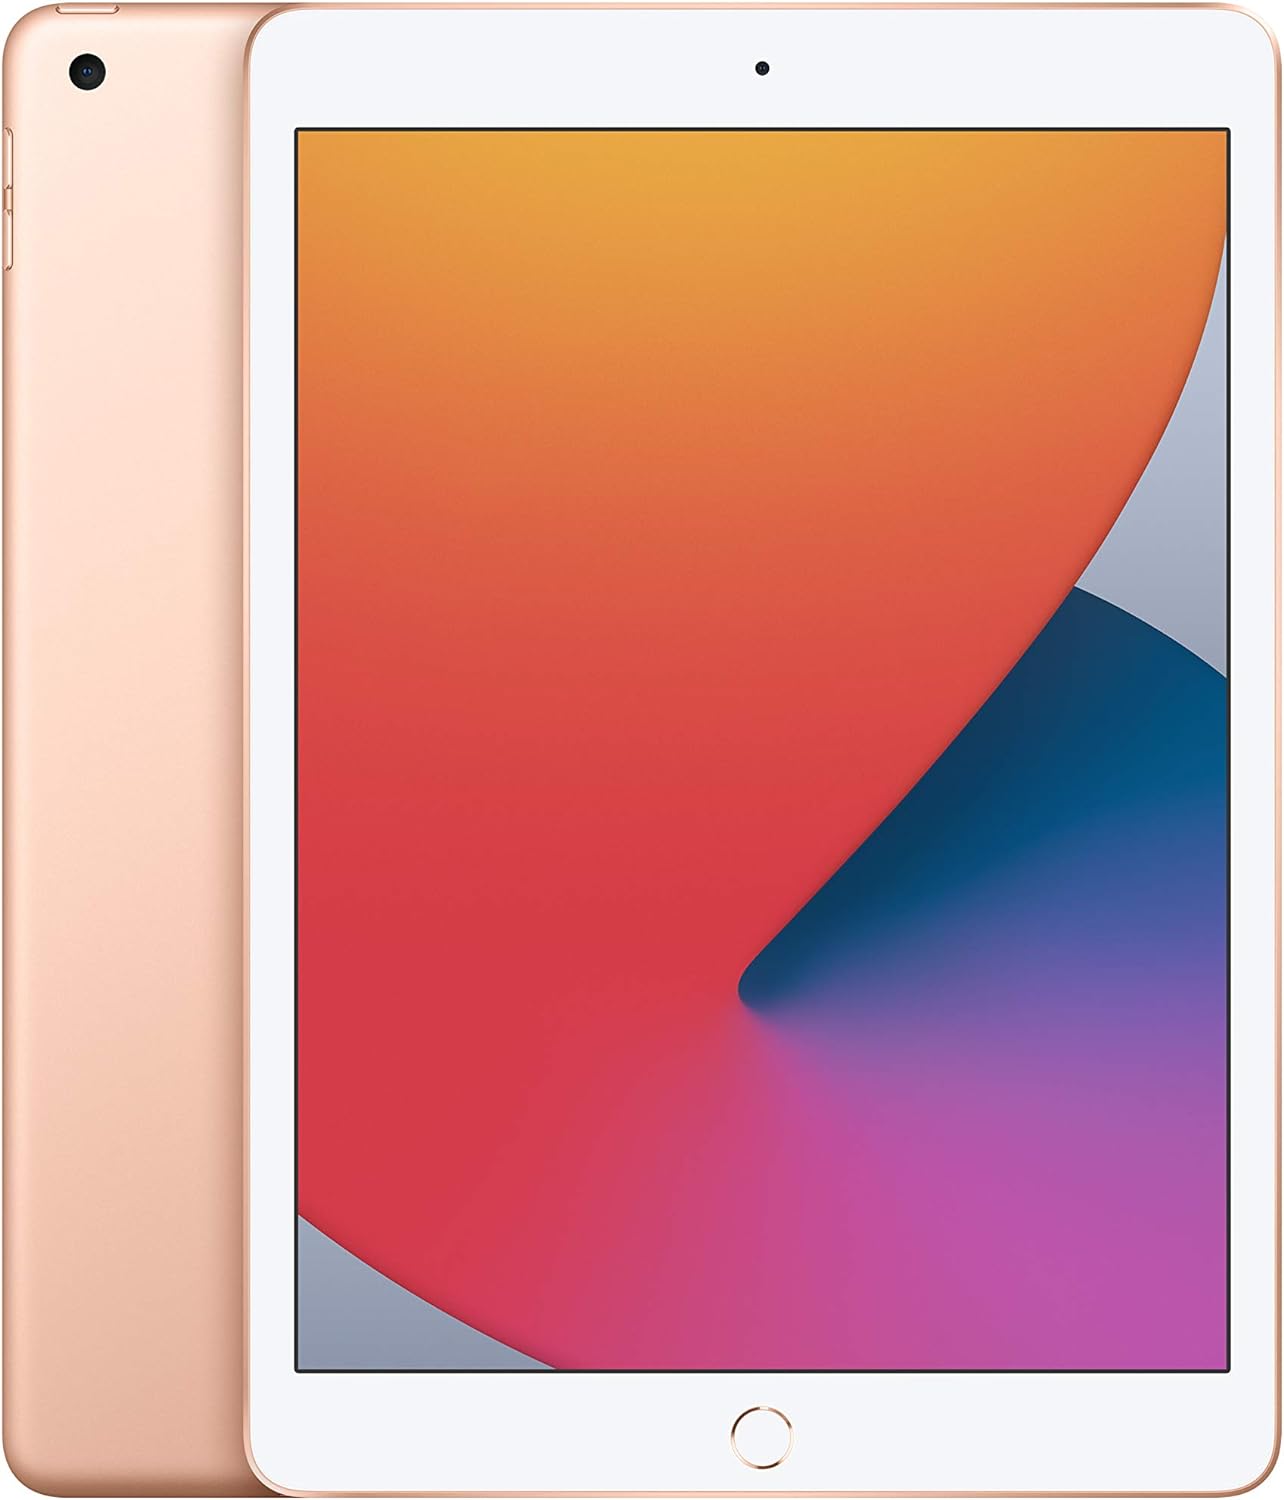 Apple 2020 iPad (10.2-Inch, Wi-Fi, 32GB) – Gold (8th Generation): Detailed Review & Recommendations